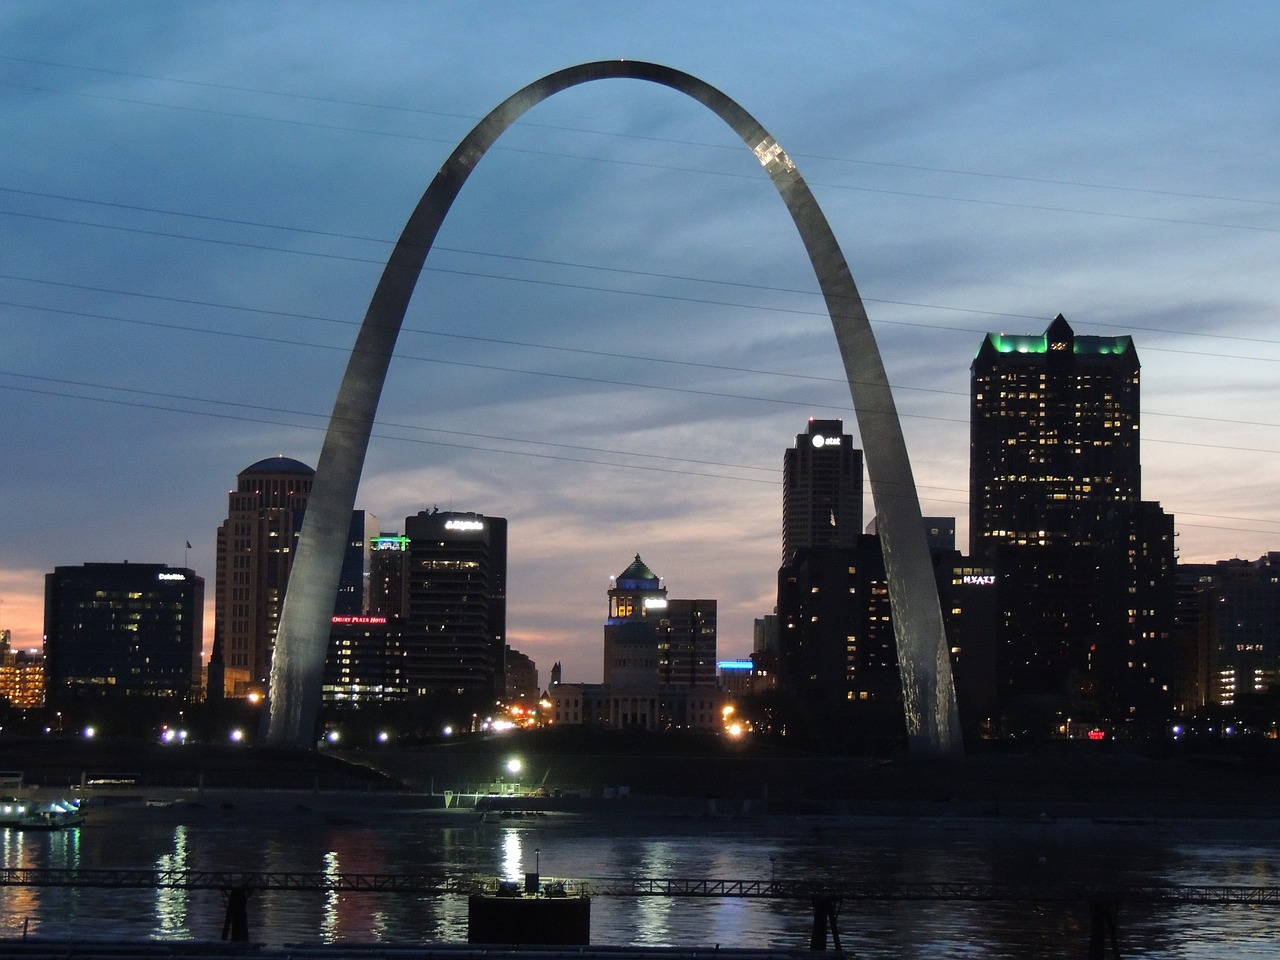 Saint Louis Adventure: Trolley Tours, Scavenger Hunts, and Culinary Delights